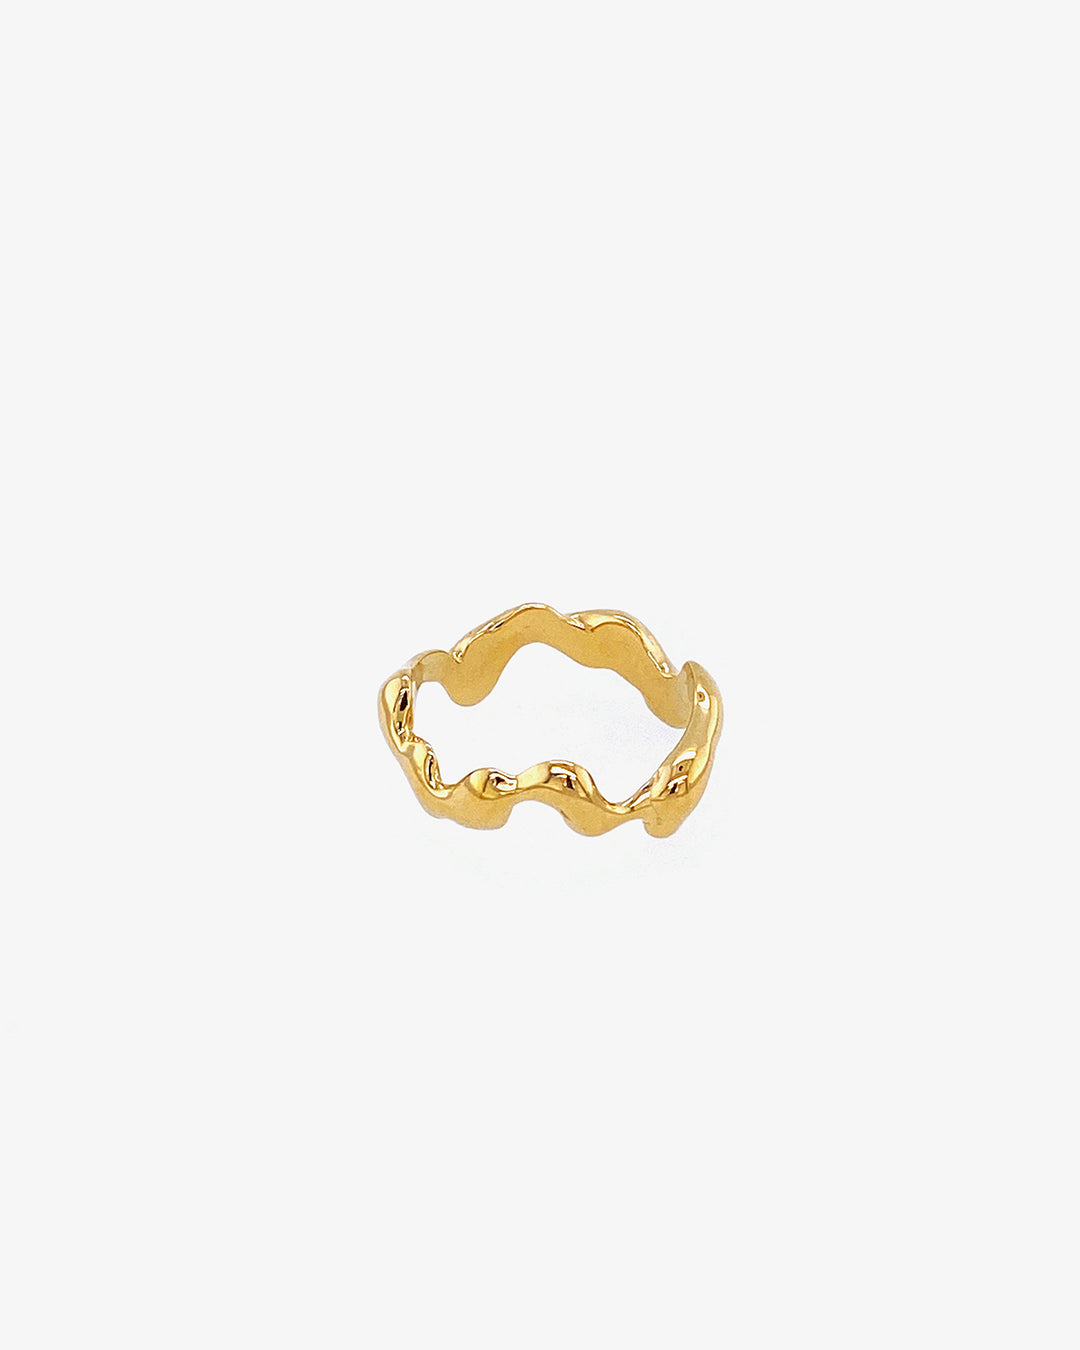 IDAMARI Himmin Ring in 18k Gold Plated in Sterling Silver